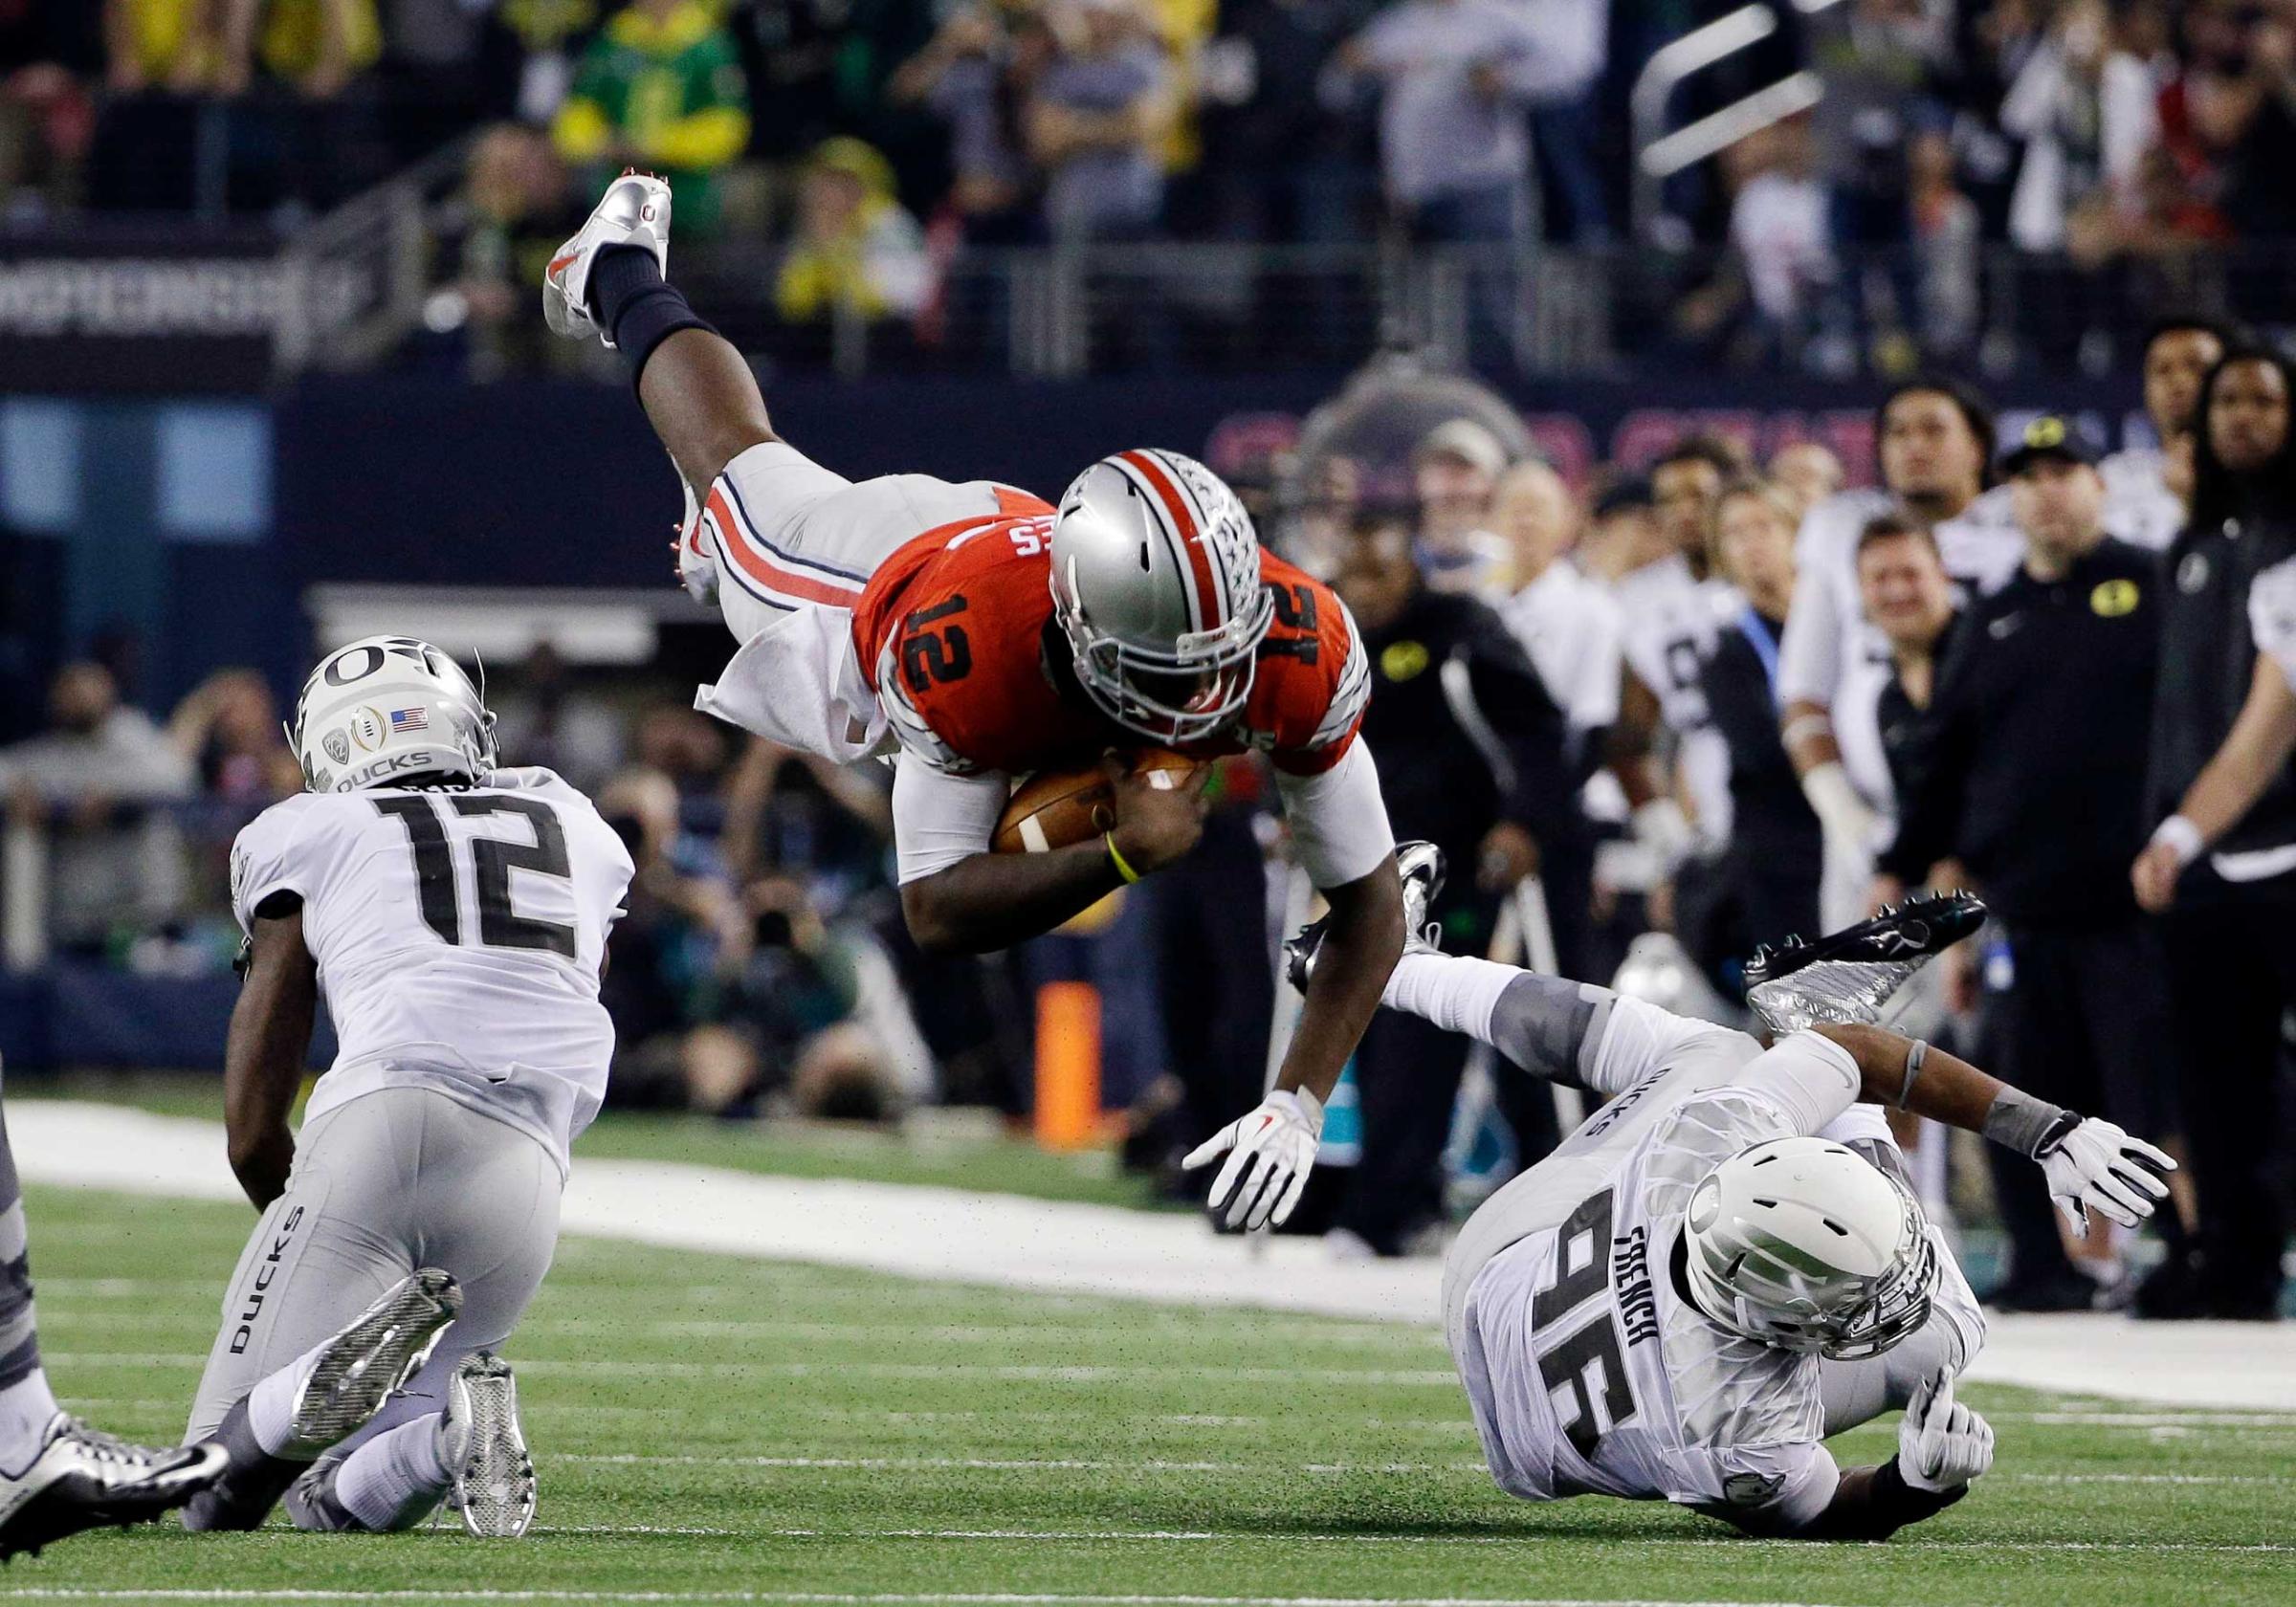 Ohio State's Cardale Jones (12) dives for a first down during the second half of the NCAA college football playoff championship game against Oregon on Jan. 12, 2015, in Arlington, Texas.